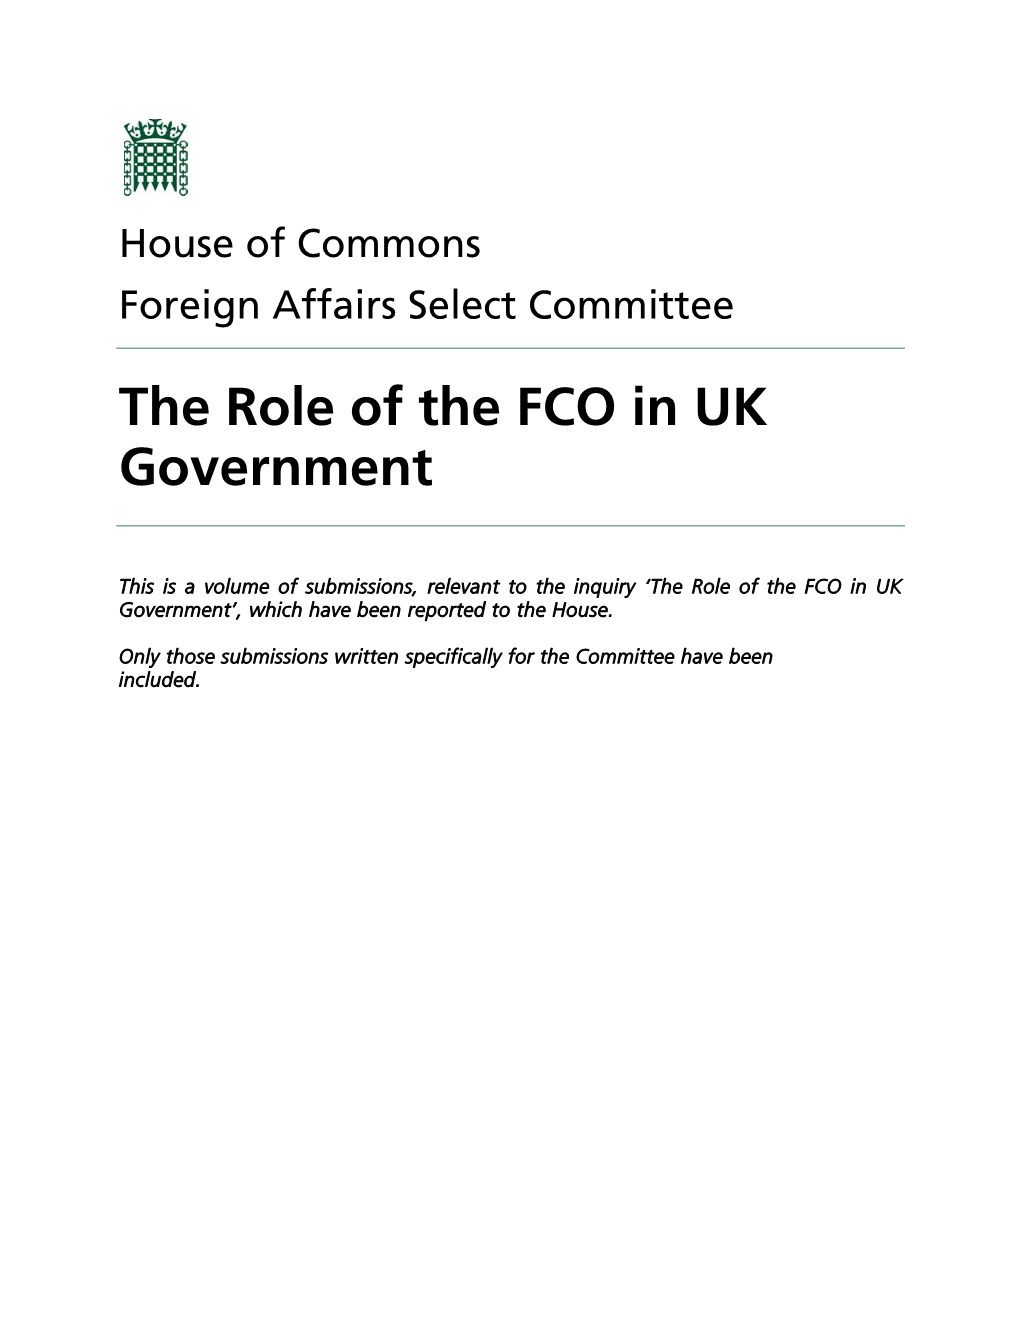 The Role of the FCO in UK Government